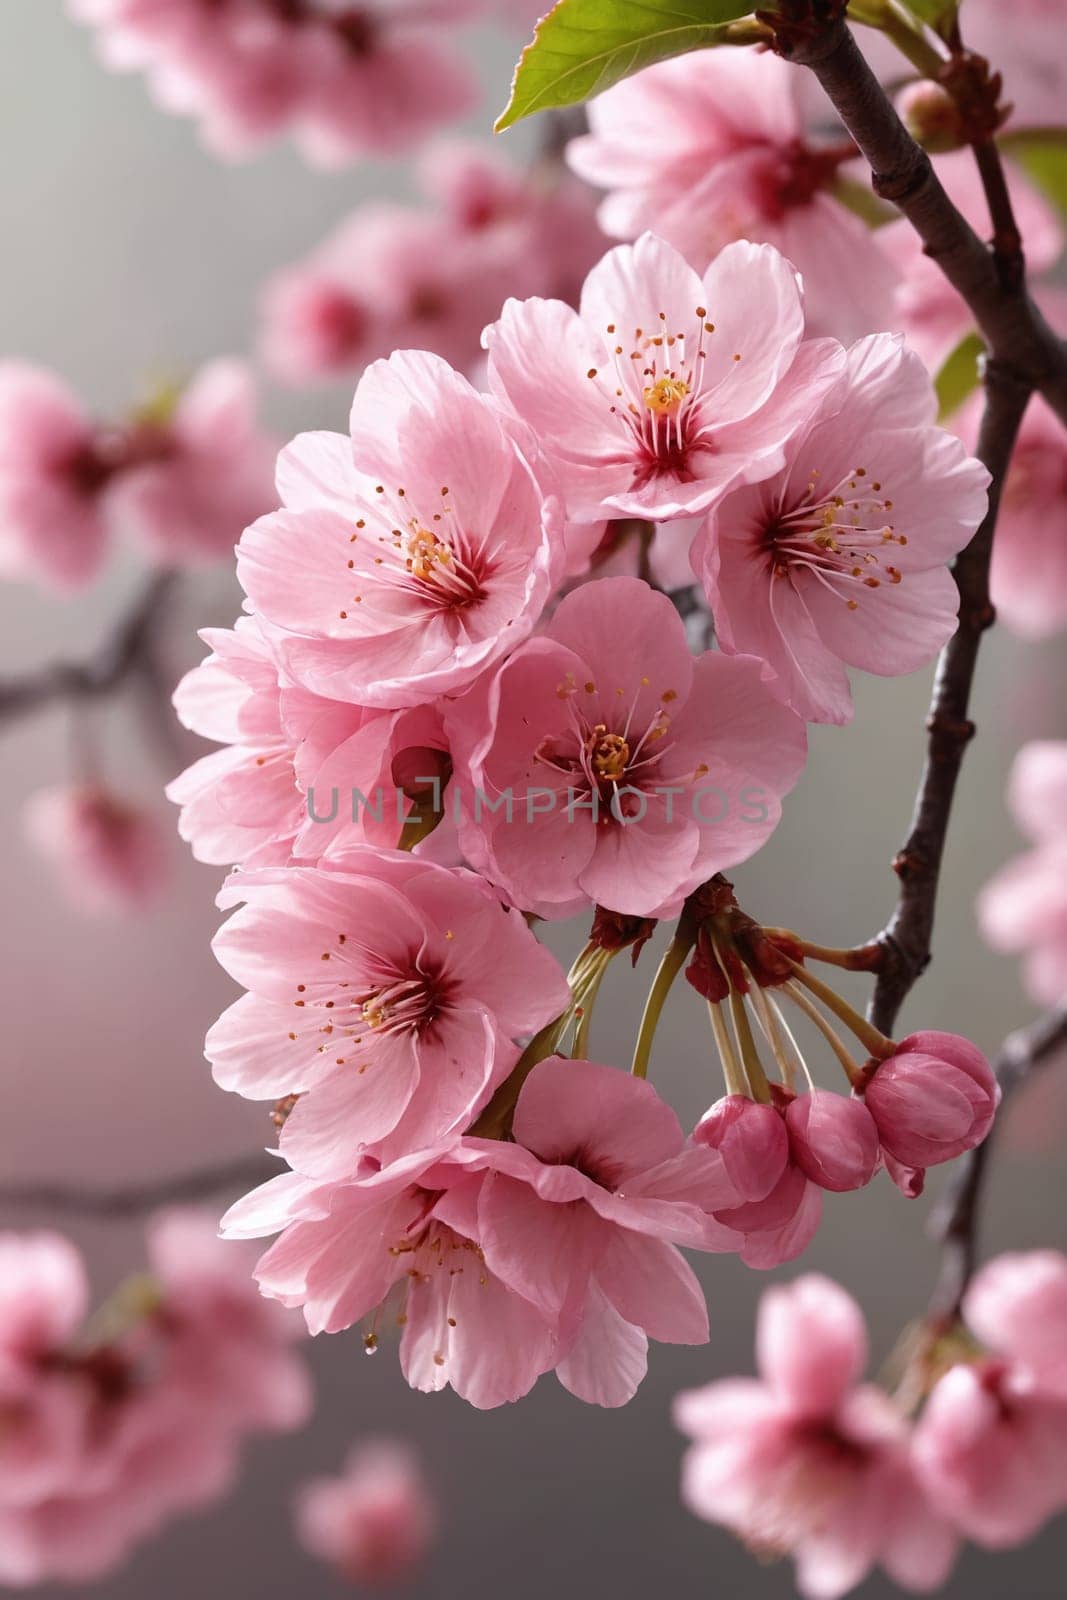 Ethereal Blossoms: A Close-Up of Spring's Pink Cherry Flowers by Andre1ns